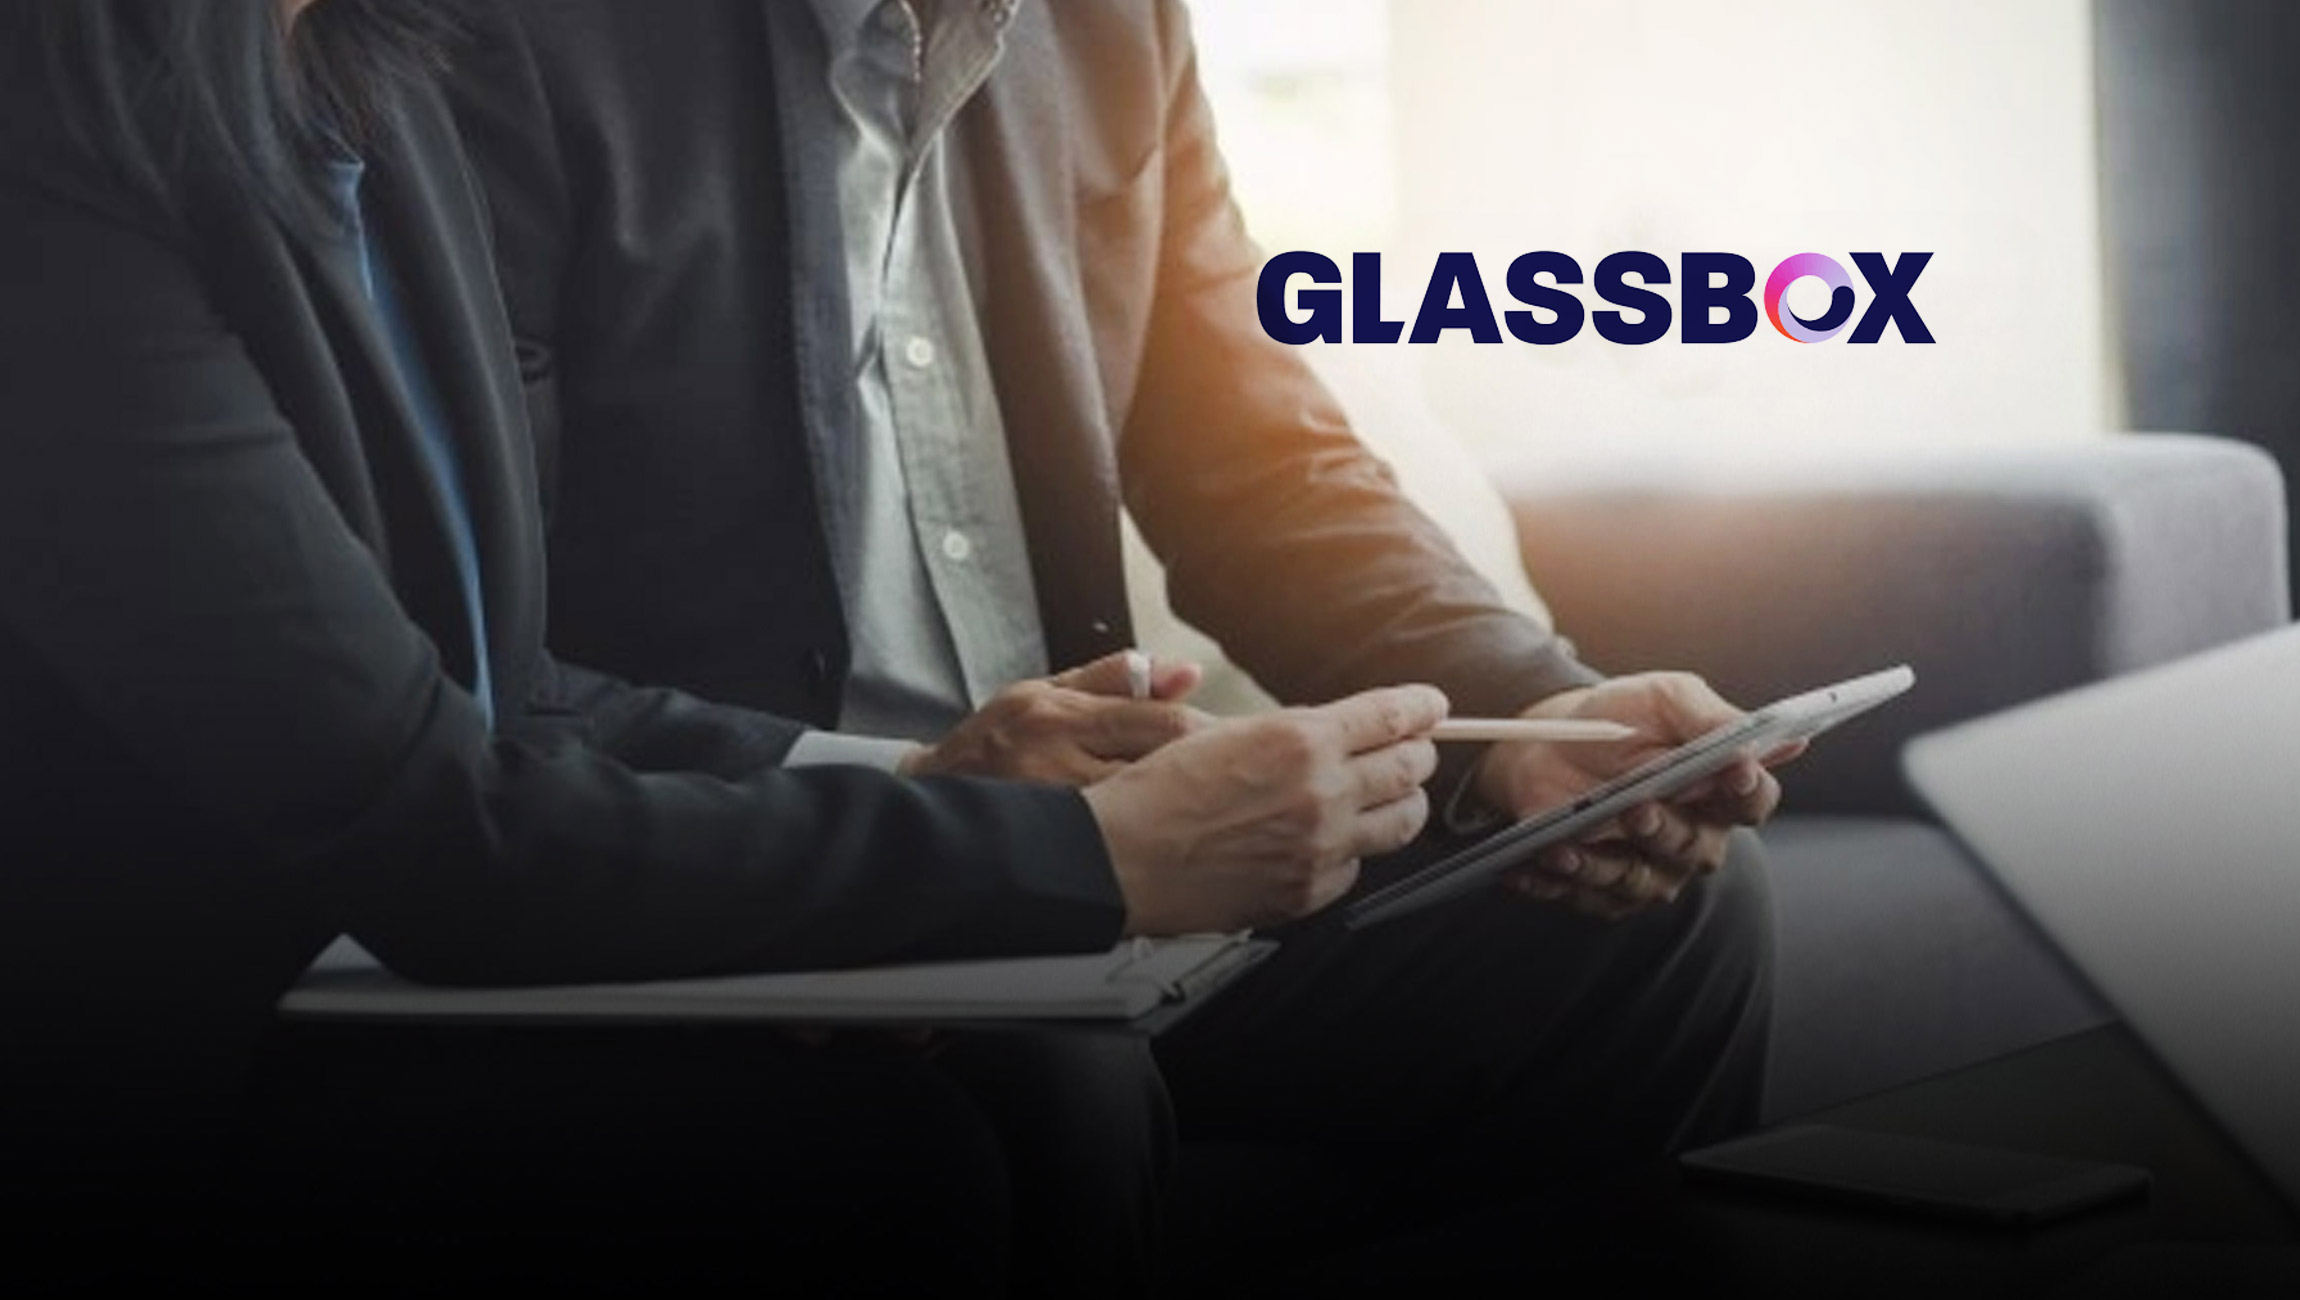 Glassbox Experienced Double Digit Growth in 2022, Carries Strong Foundation Into 2023